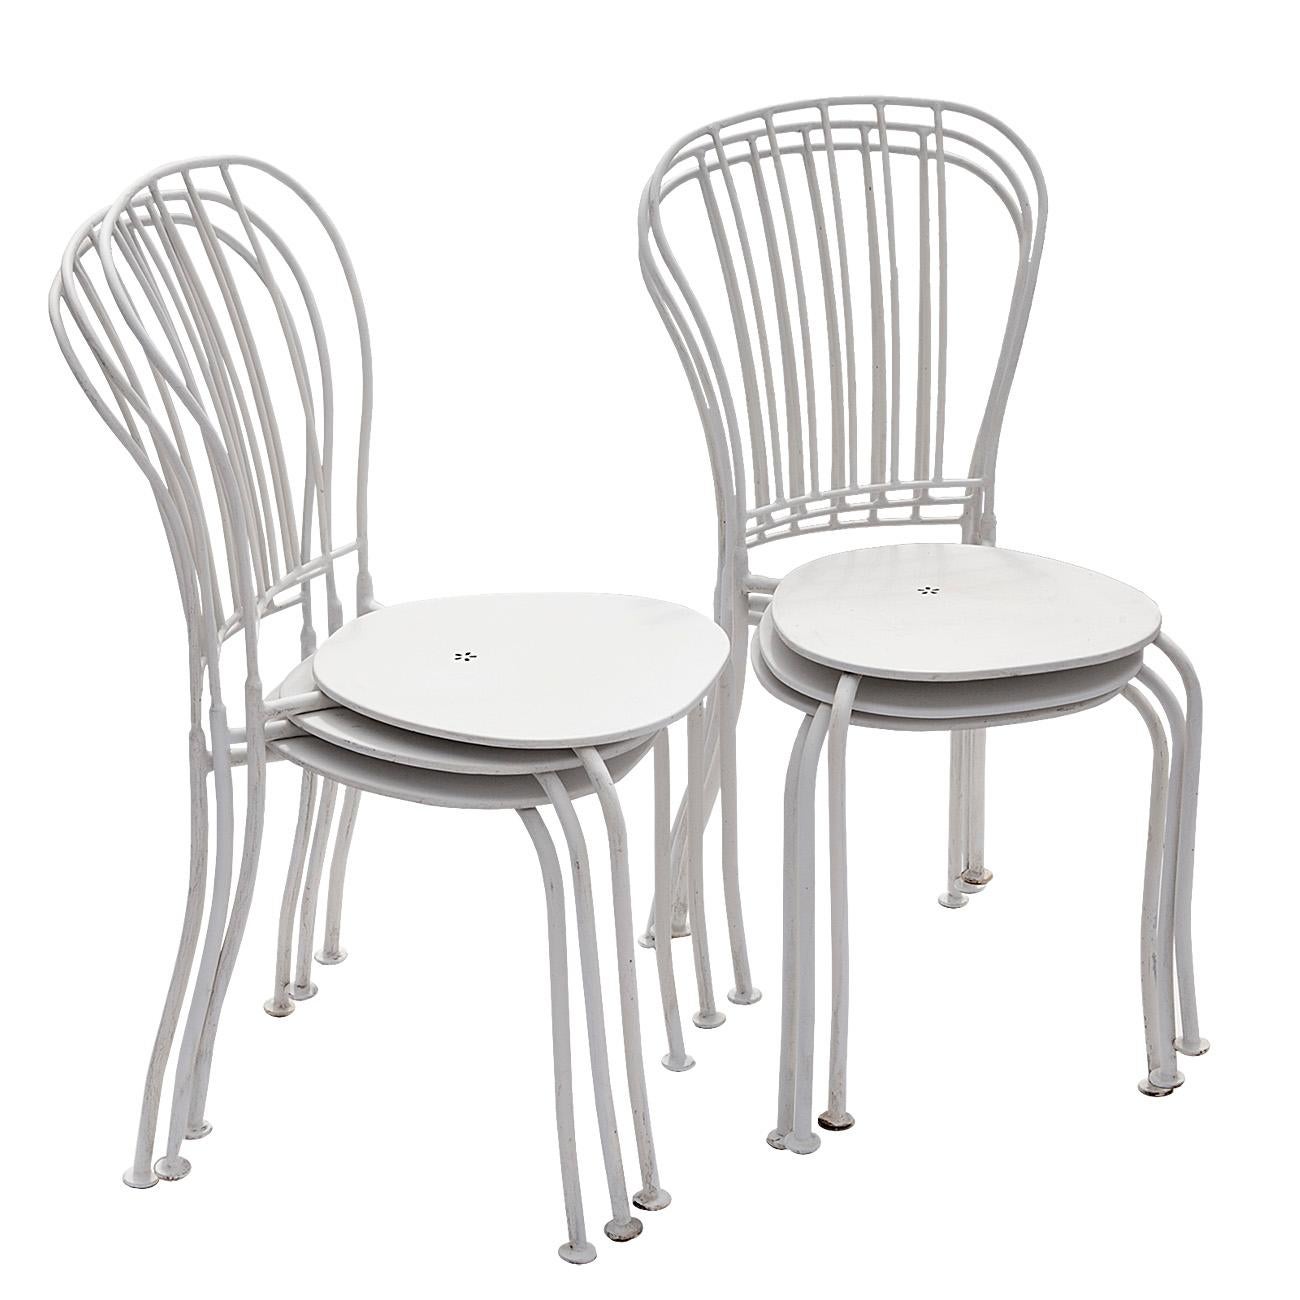 Set of 6 Iron European Stackable Chairs In Good Condition For Sale In Malibu, CA